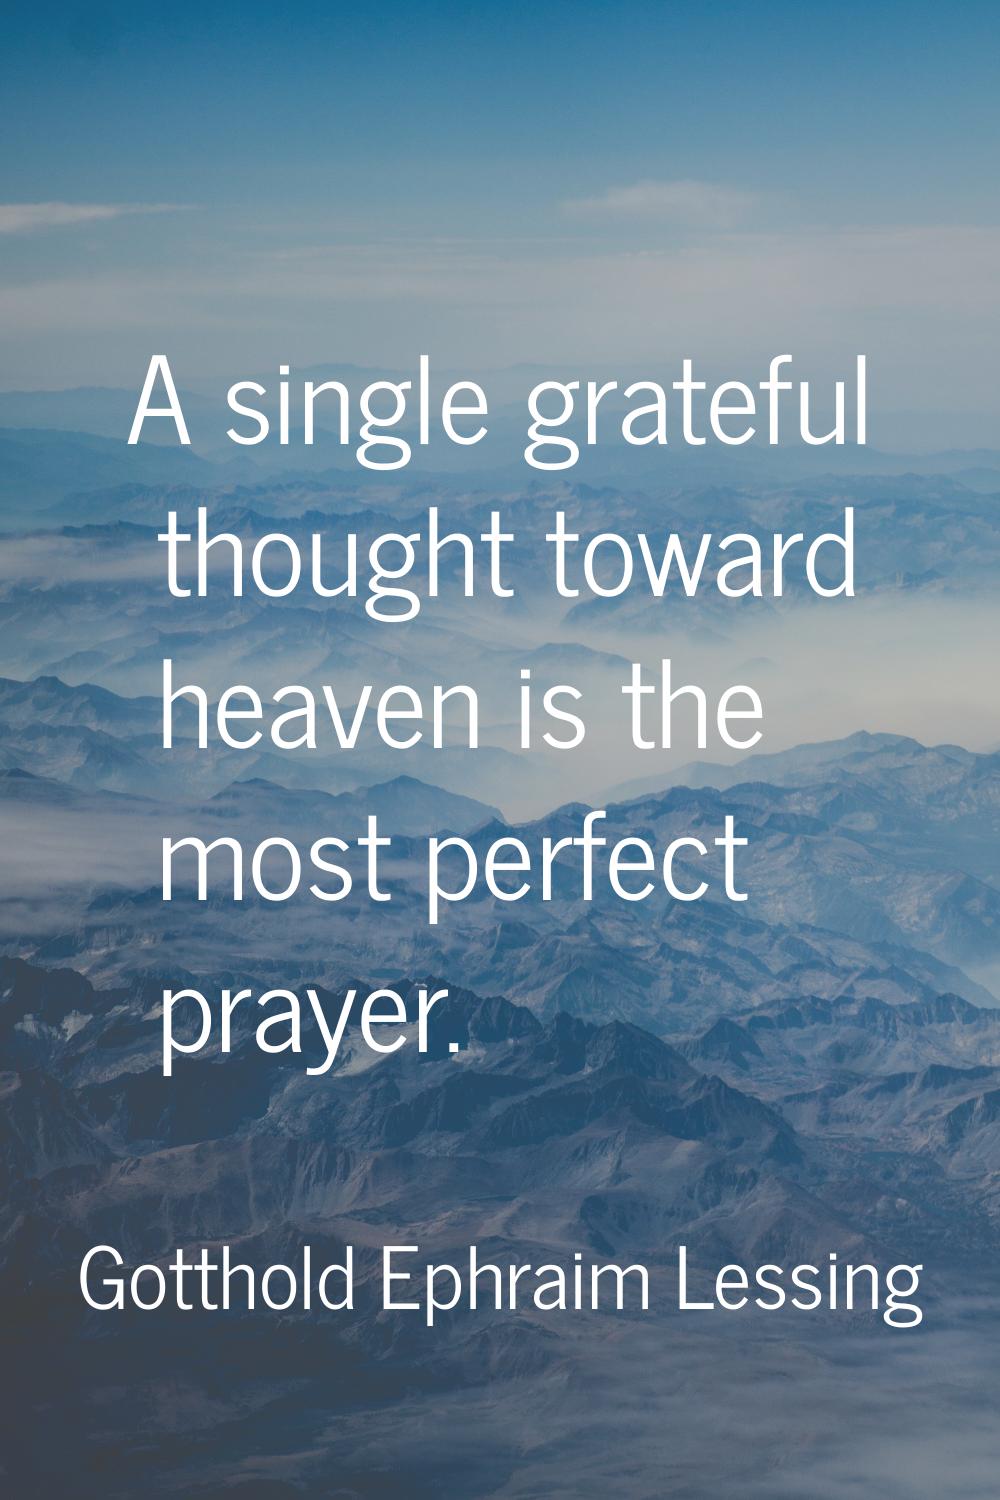 A single grateful thought toward heaven is the most perfect prayer.